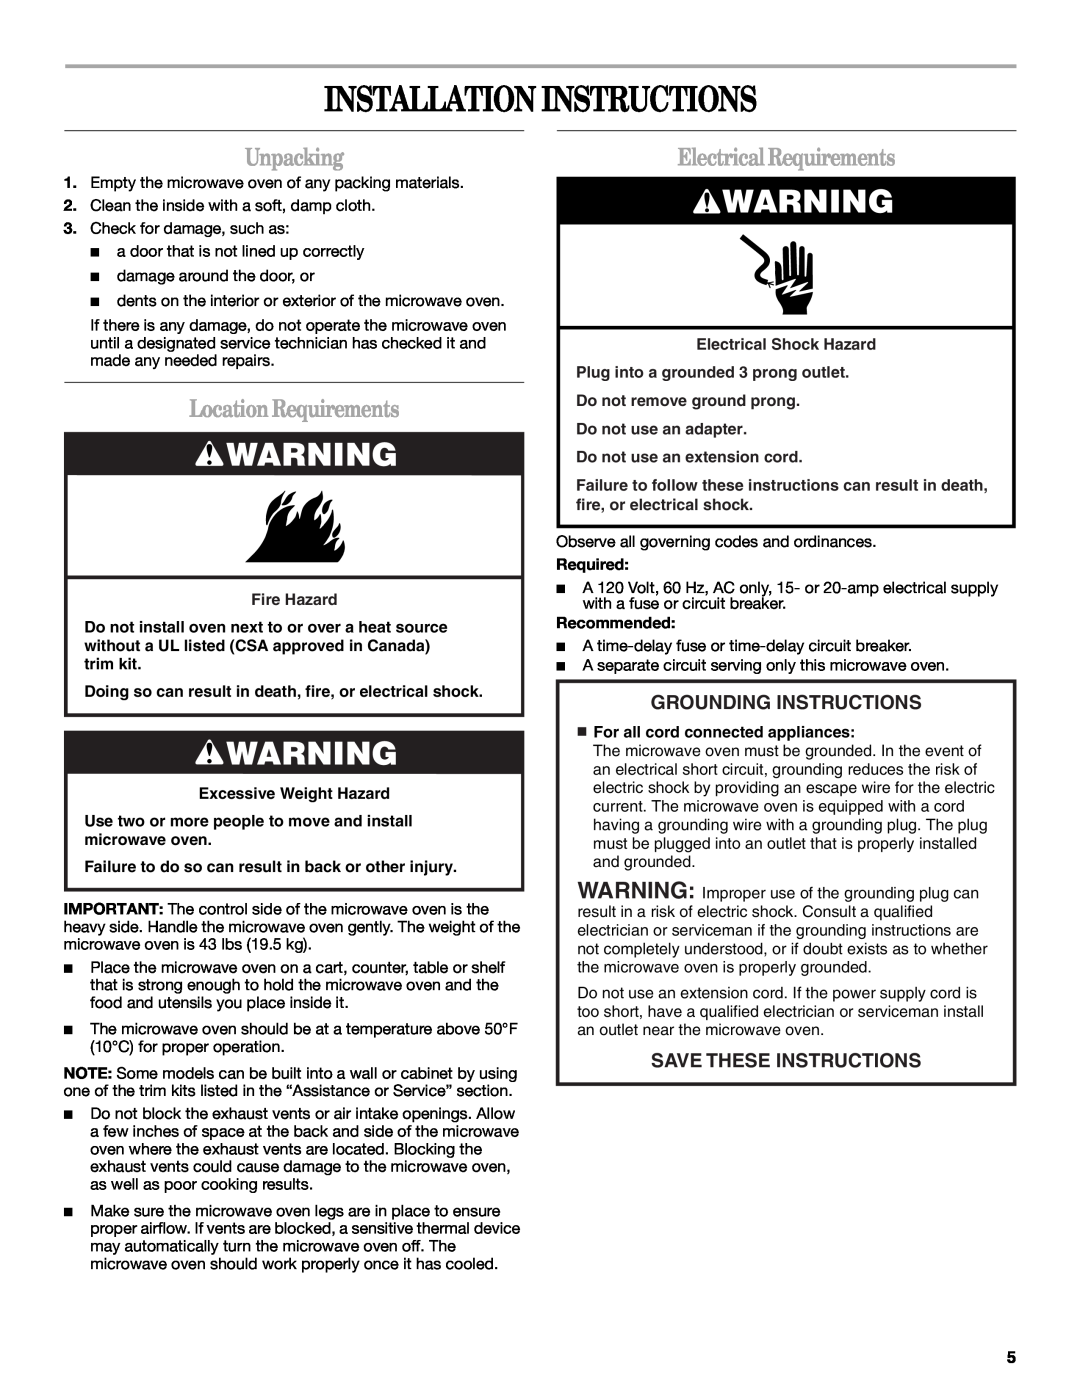 Whirlpool MT4155 Installation Instructions, Unpacking, LocationRequirements, ElectricalRequirements, Fire Hazard, Required 